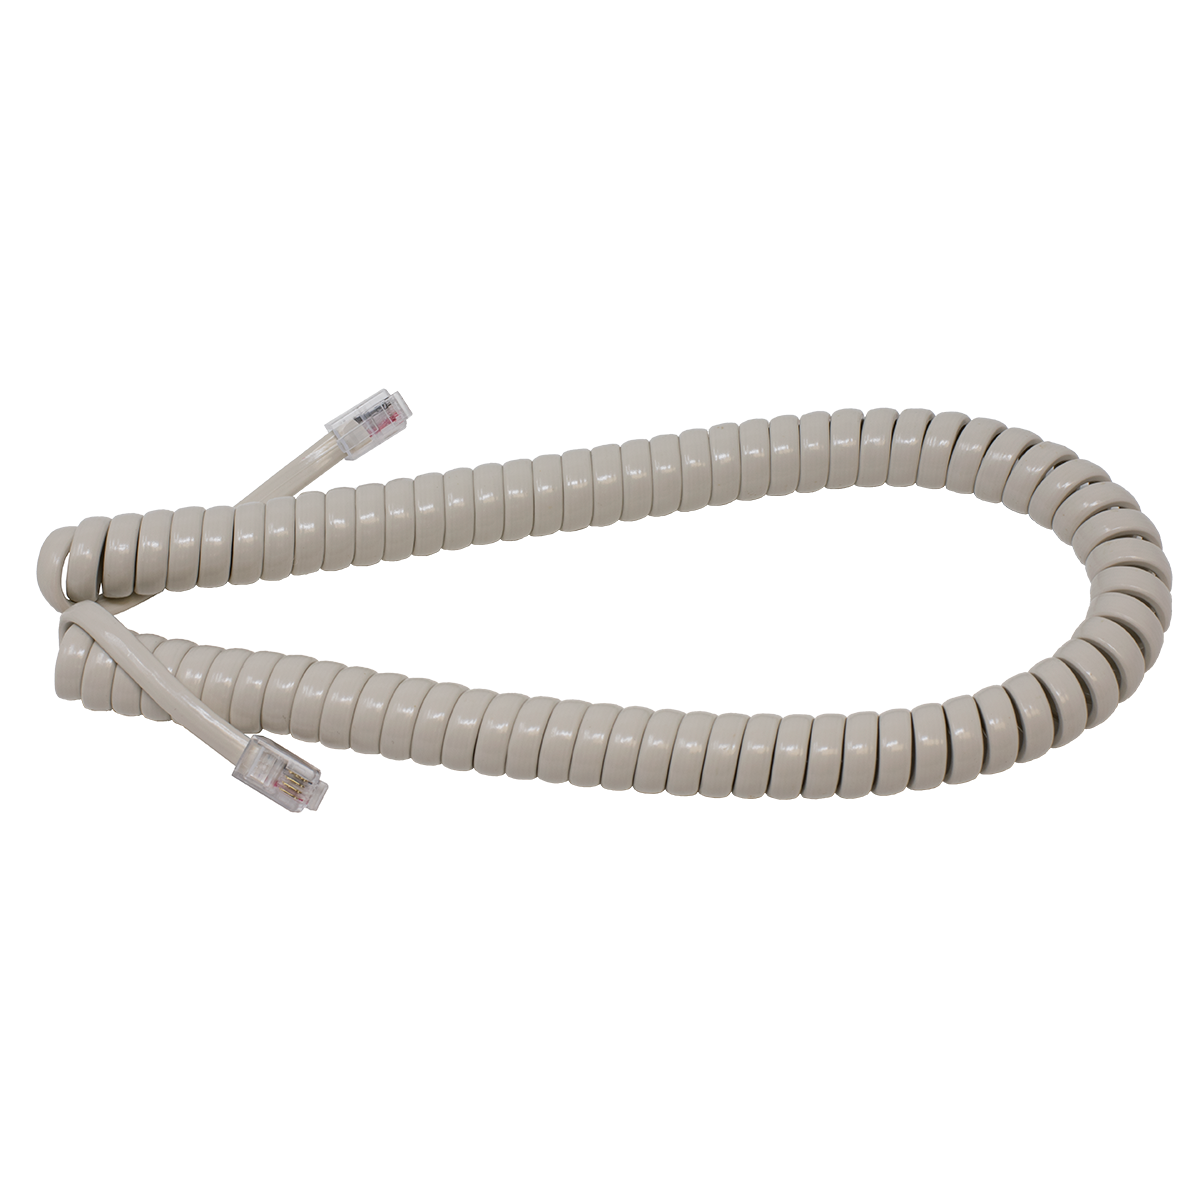 7' Off White Coiled Handset Cord